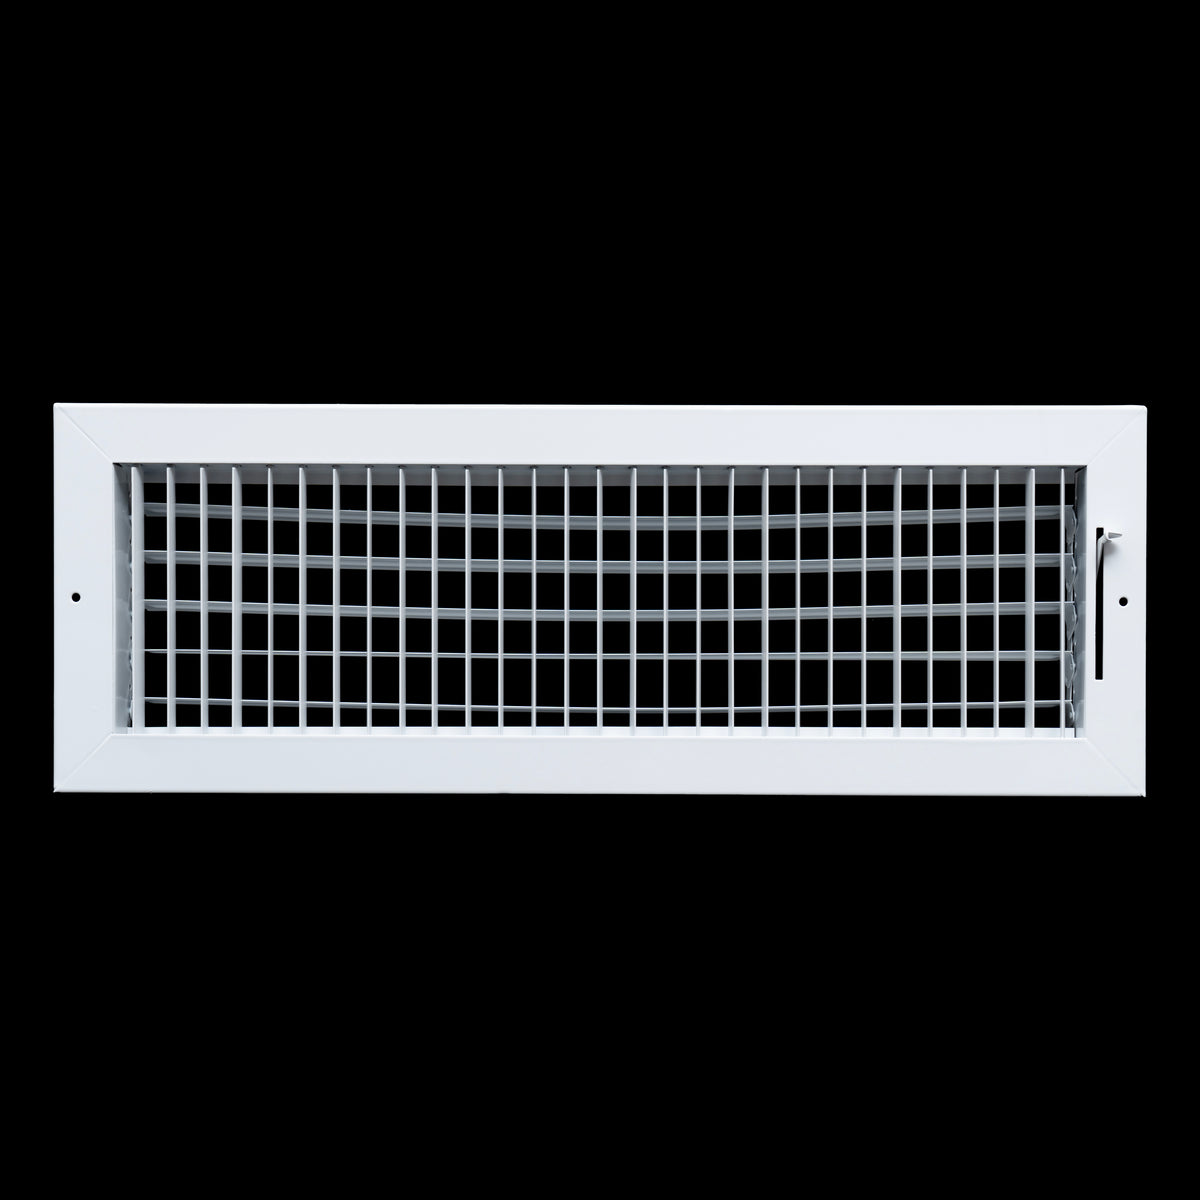 airgrilles 20x6 steel adjustable air supply grille register vent cover grill for sidewall and ceiling White  Outer Dimensions: 21.75"W X 7.75"H for 20x6 Duct Opening